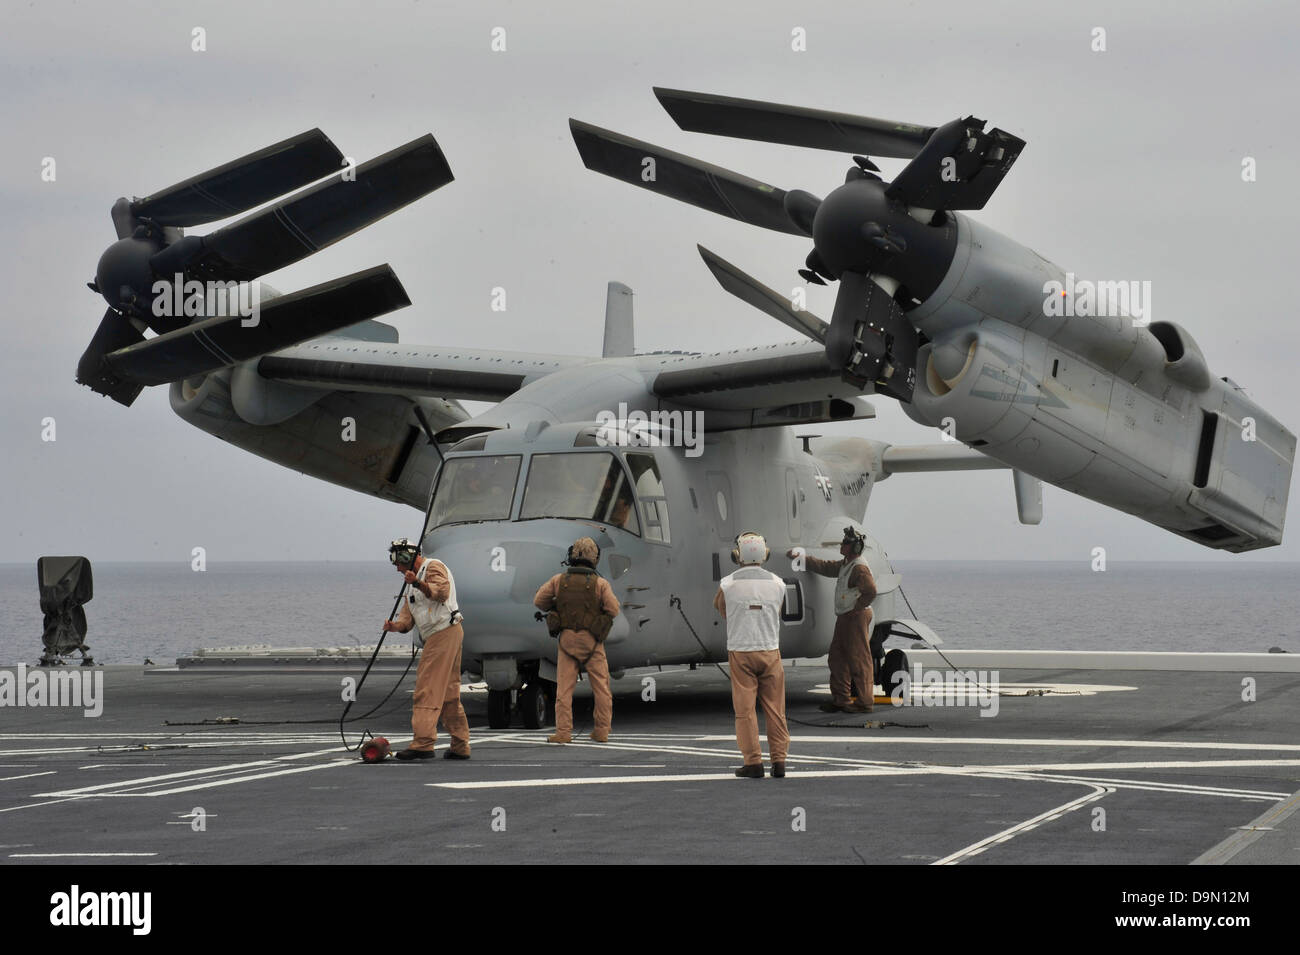 A US Marine Corps MV-22B Osprey aircraft is inspected after landing on ...